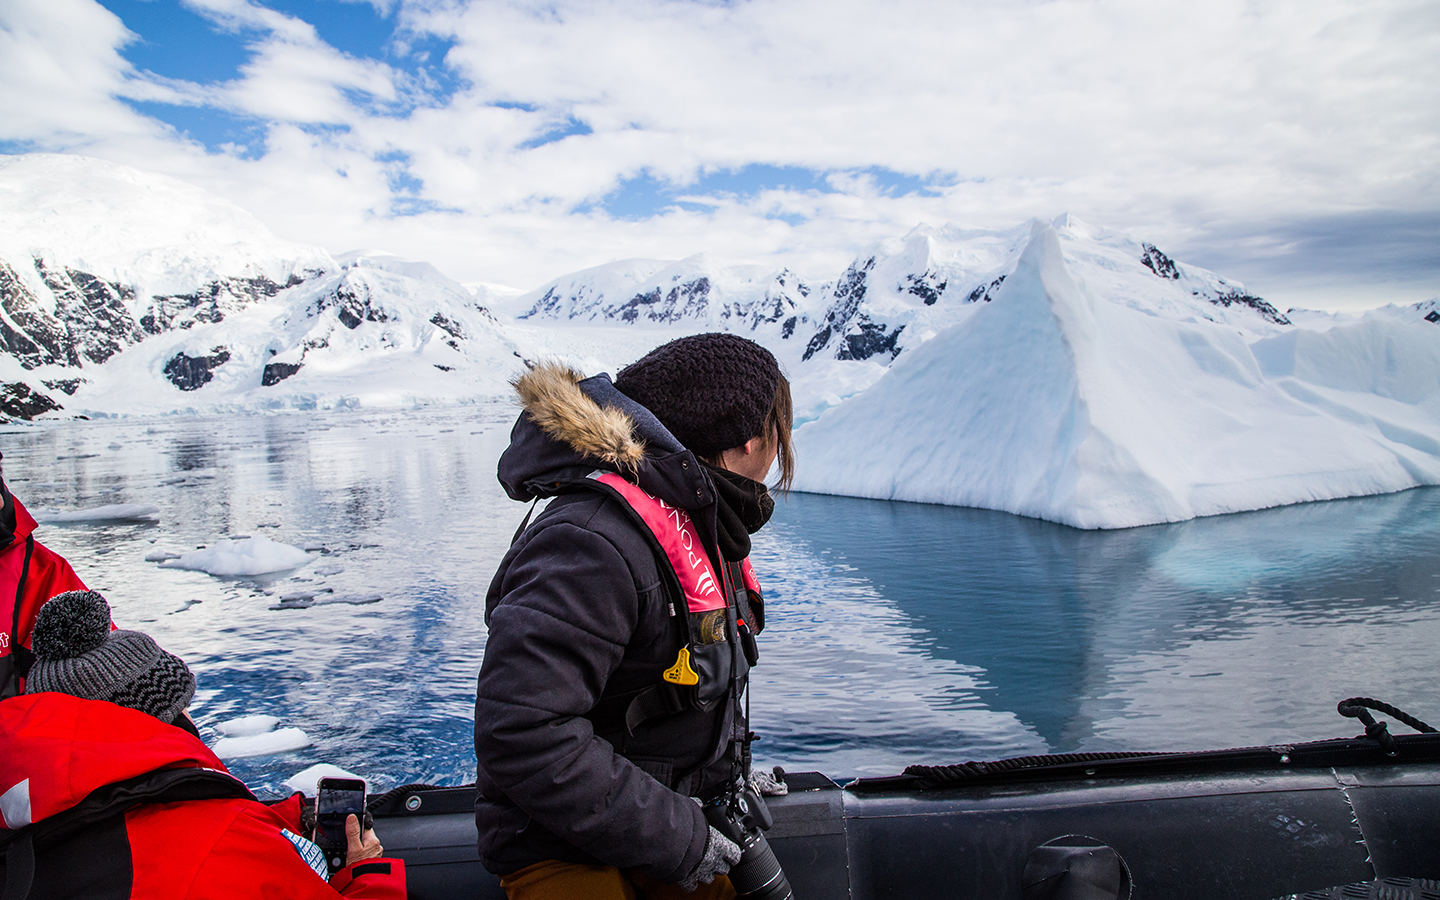 woman in black sits inside inflatable skiff with views of white Antarctica landscape and ocean filled with icebergs